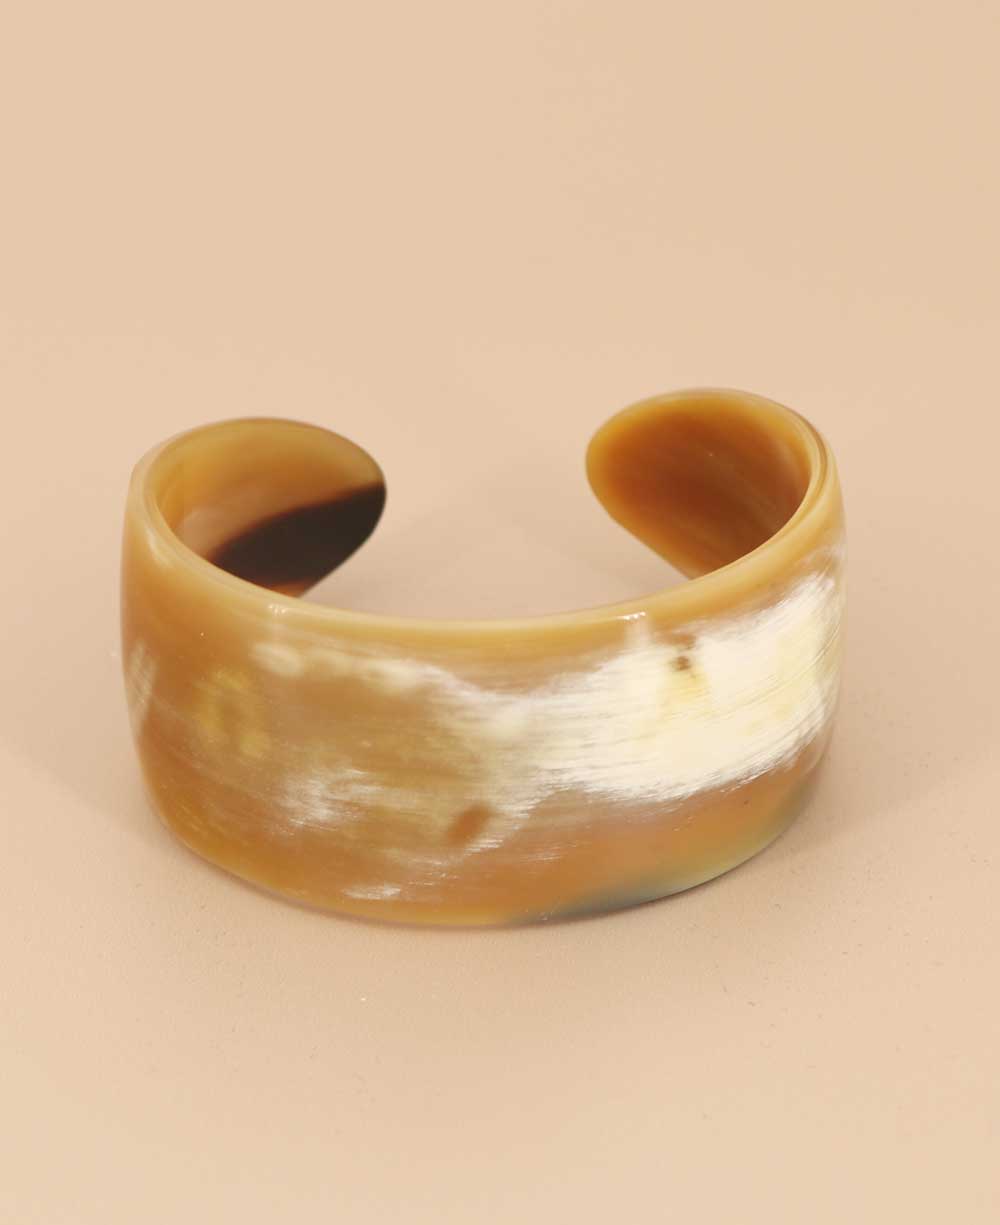 Horn Cuff Bracelet with Gemstone and Gold Inlay, India